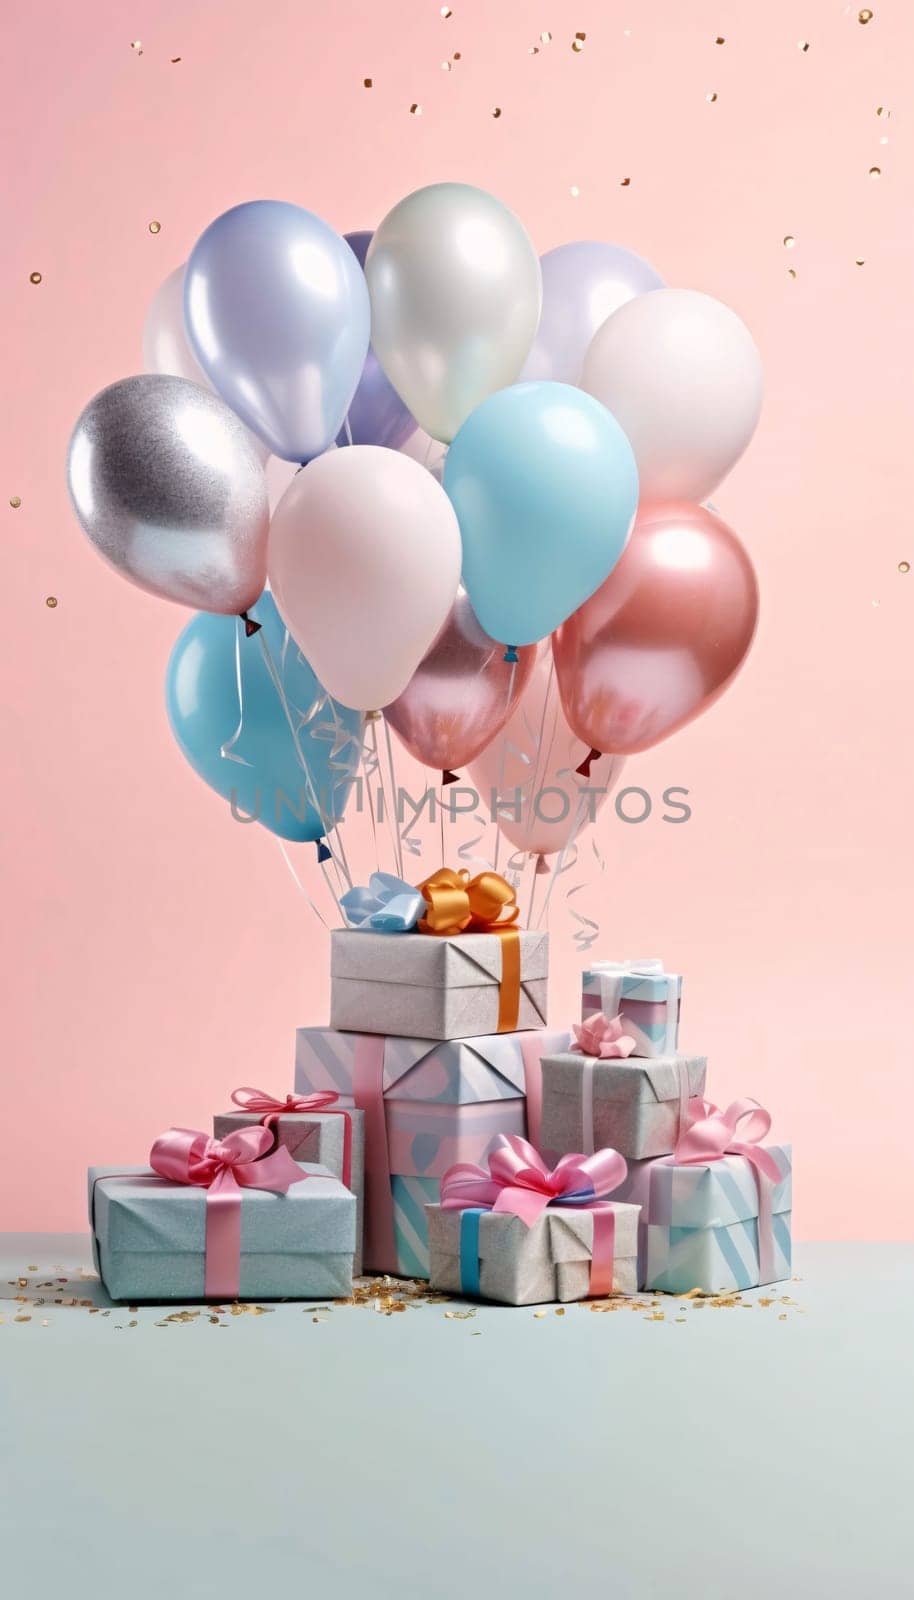 Colorful balloons and gifts with bow, confetti, bright background.Valentine's Day banner with space for your own content. Heart as a symbol of affection and love.